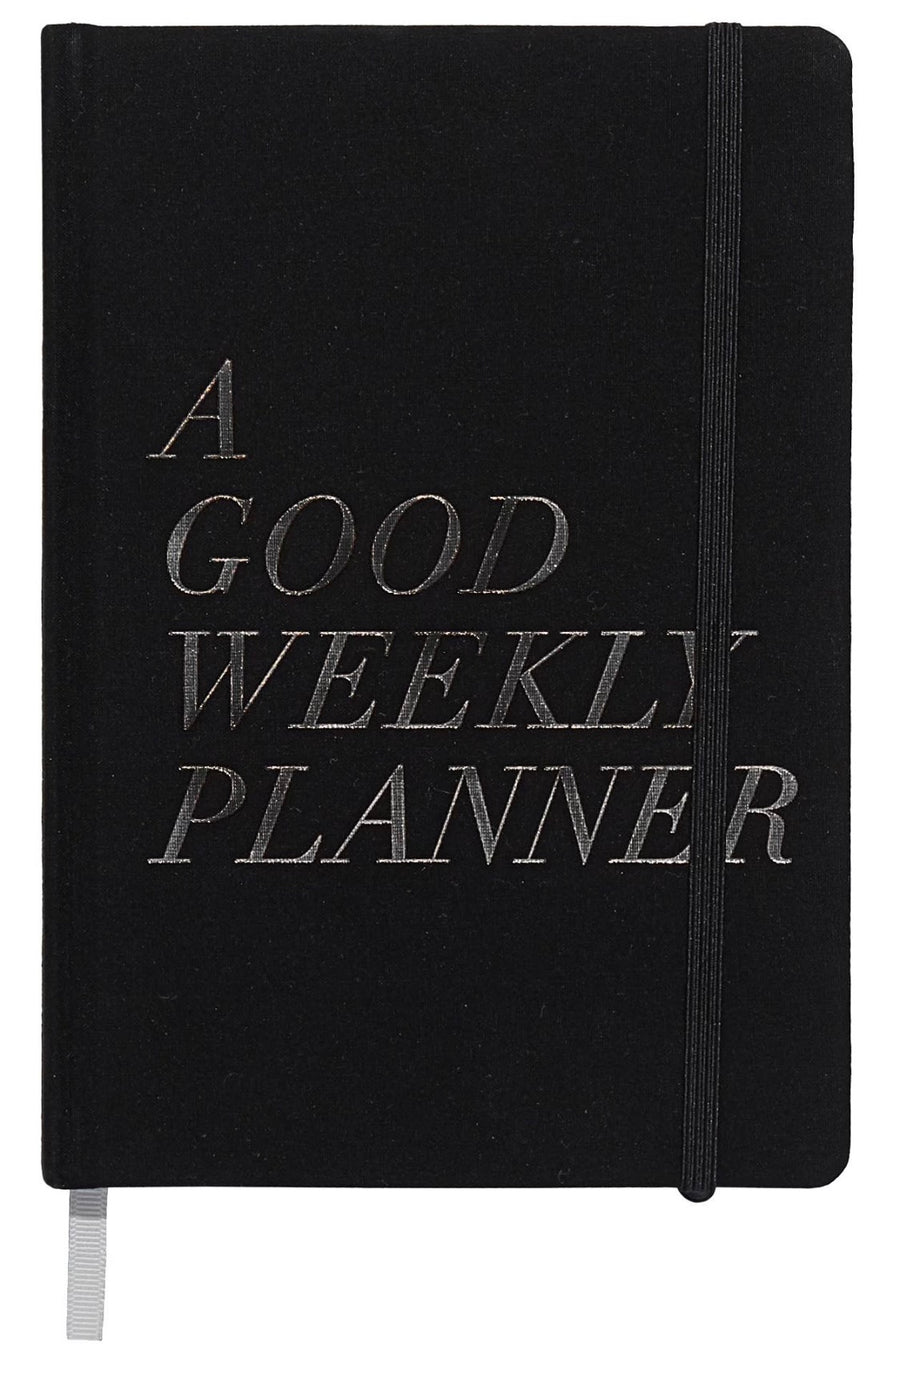 A Good Weekly Planner